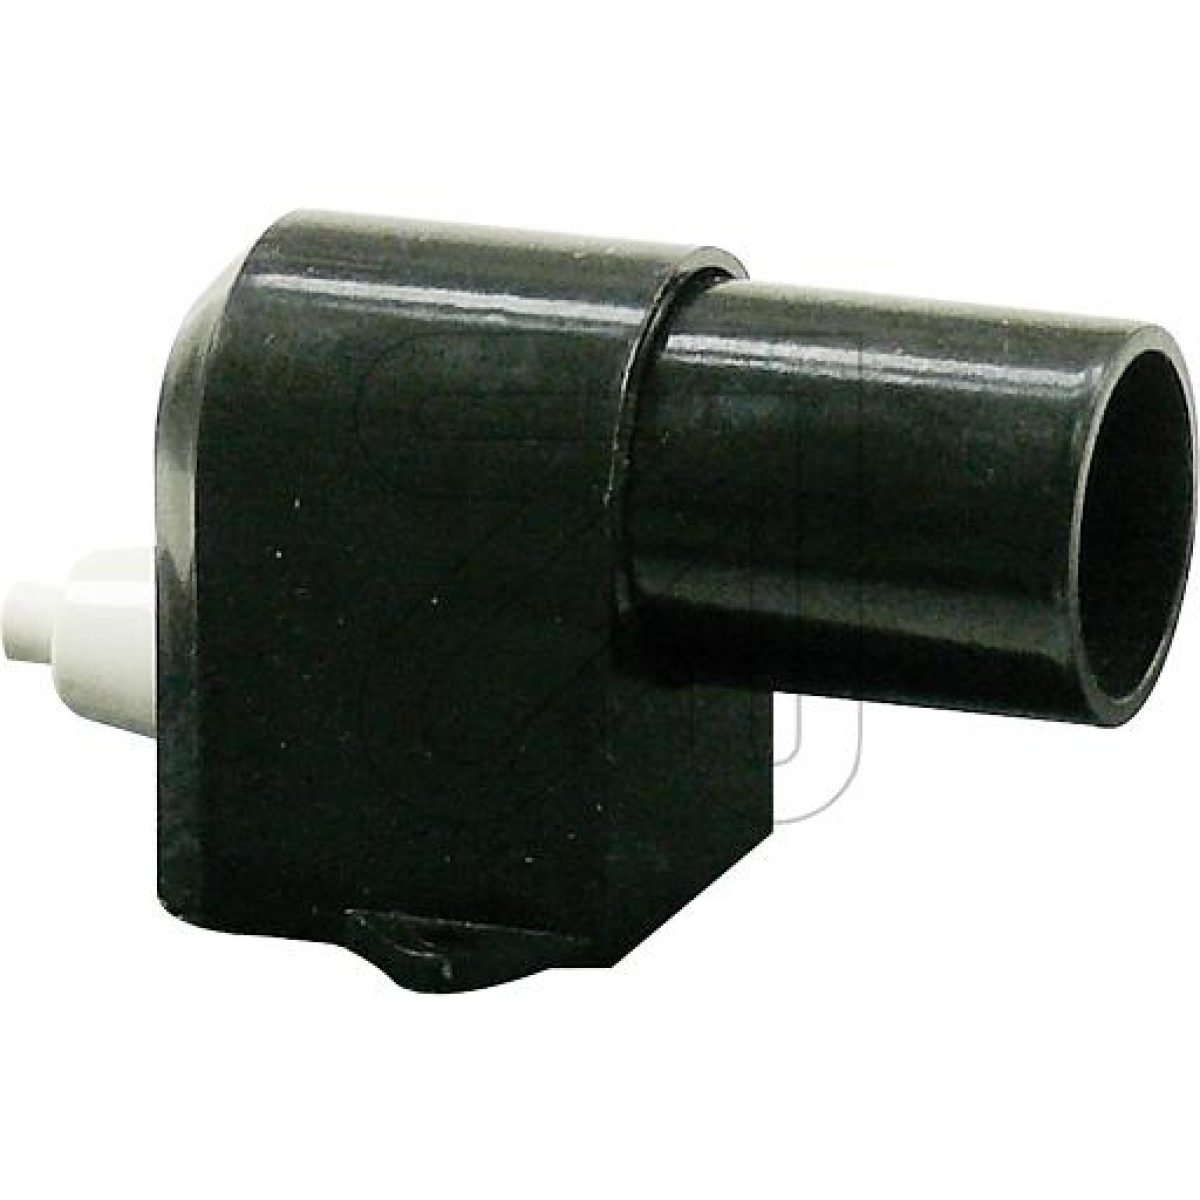 electroplastPush-button bracket E14 black (with normally open switch)-Price for 2 pcs.Article-No: 604385